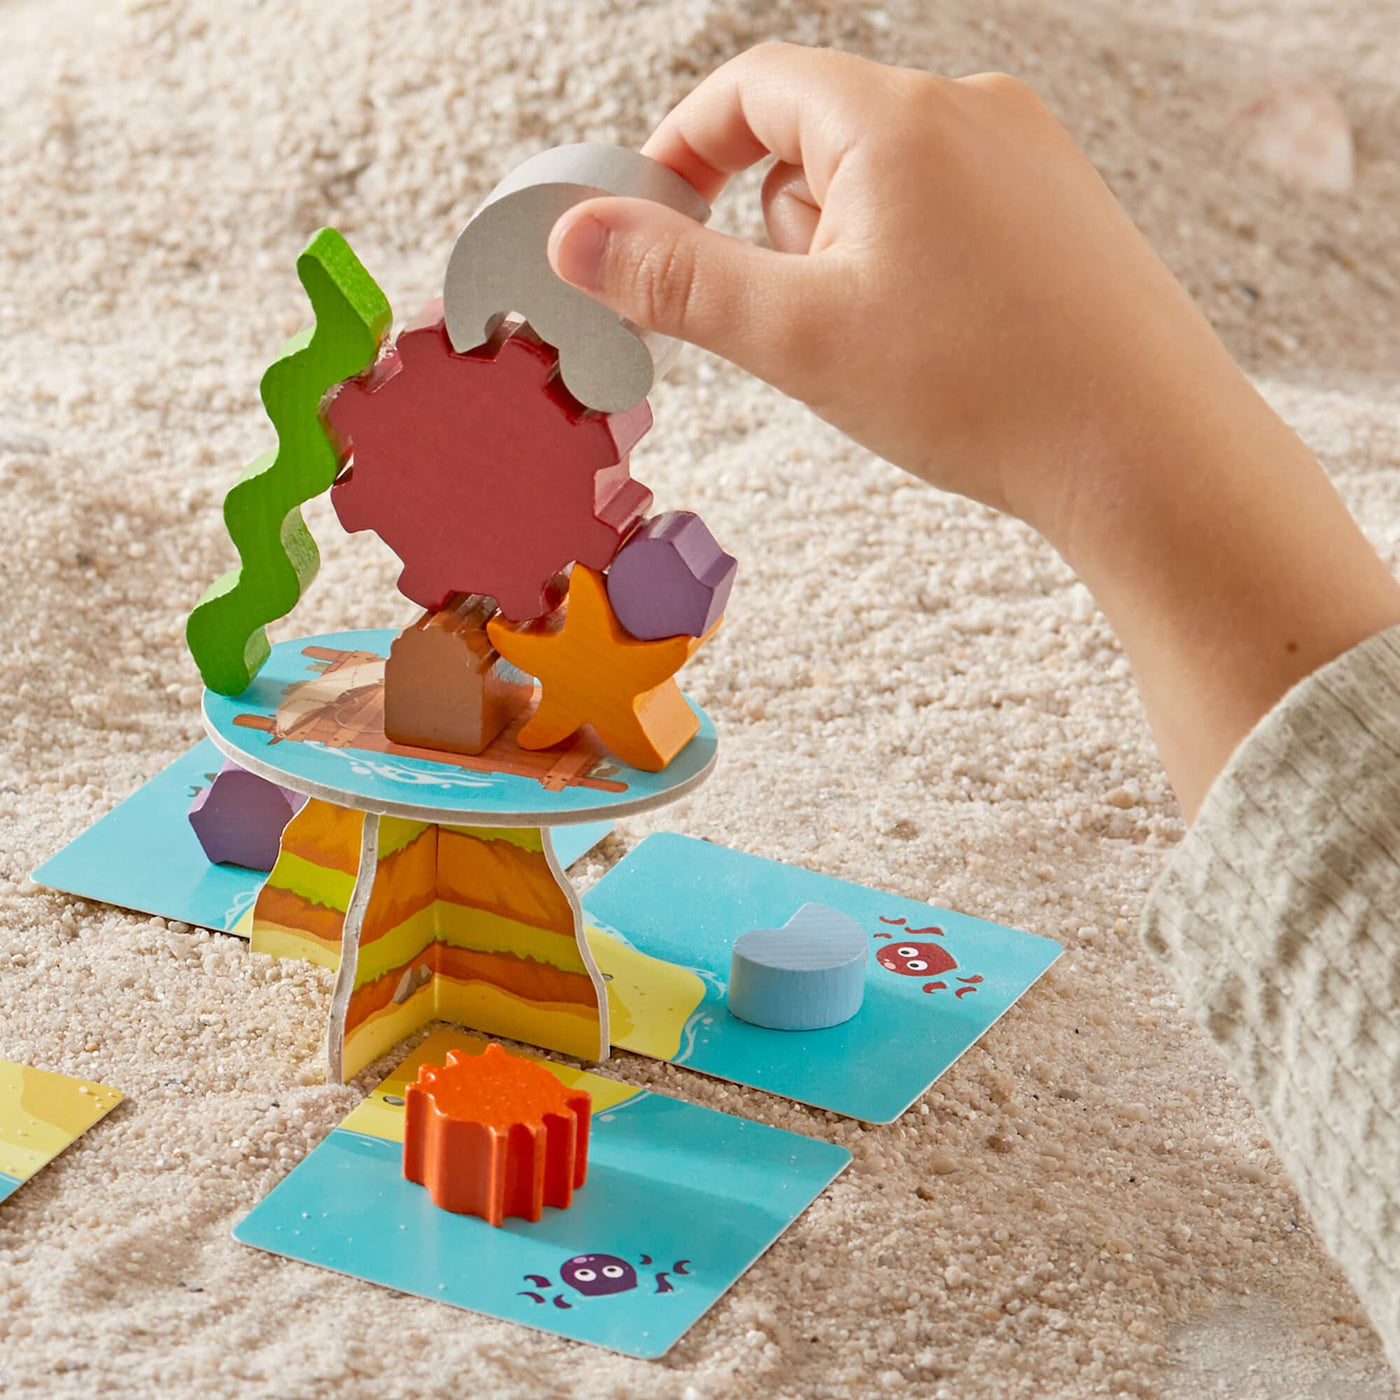 Child stacking wooden game pieces for HABA's Flotsam Float game